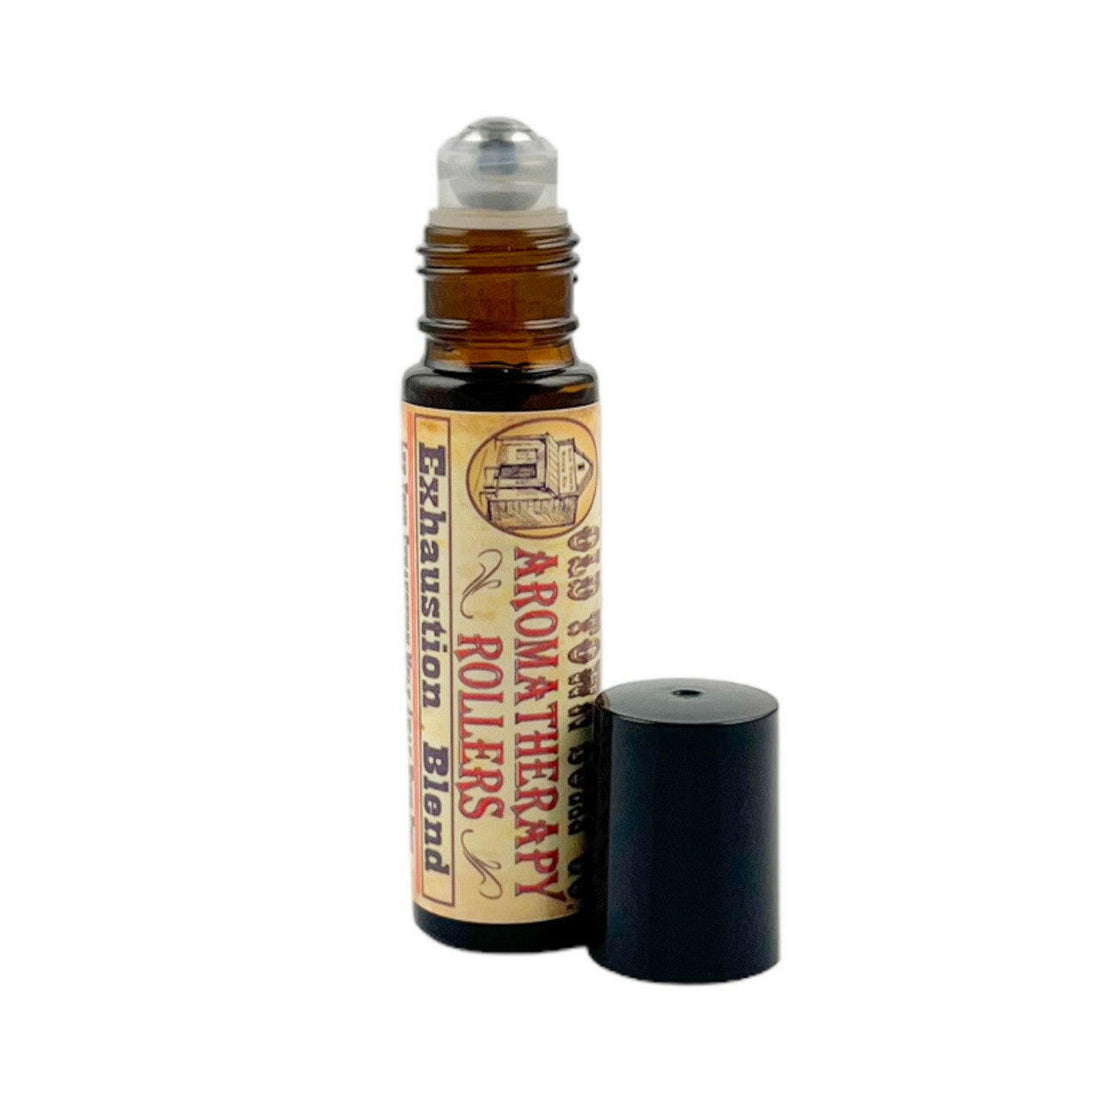 Exhaustion Blend -Essential Oil Rollers - Old Town Soap Co.